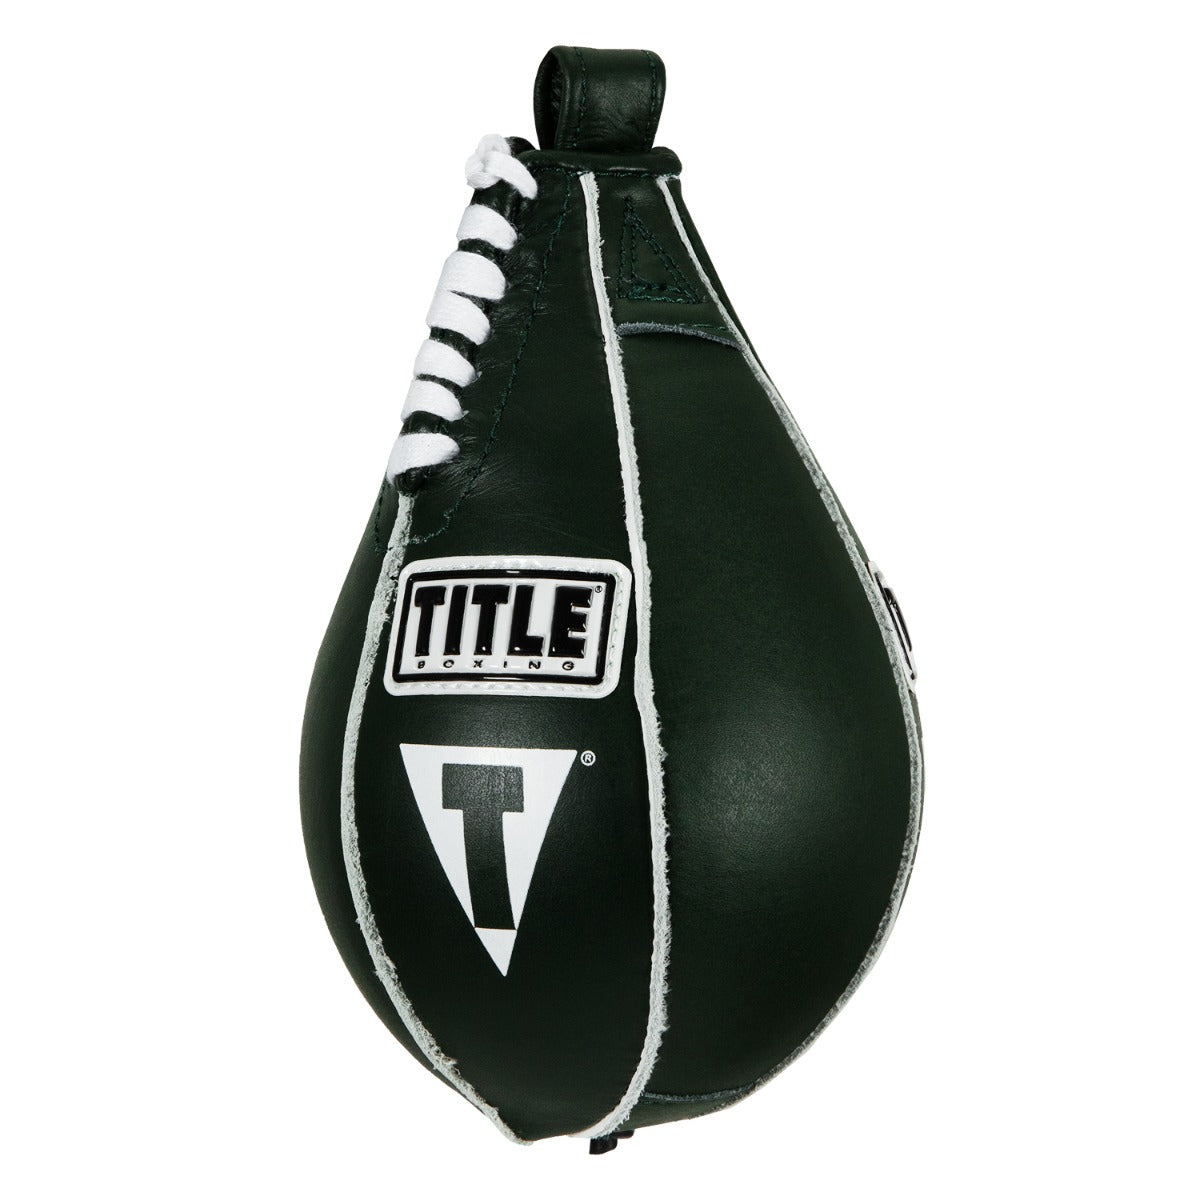 TITLE Extra-Wide Load Body Bag